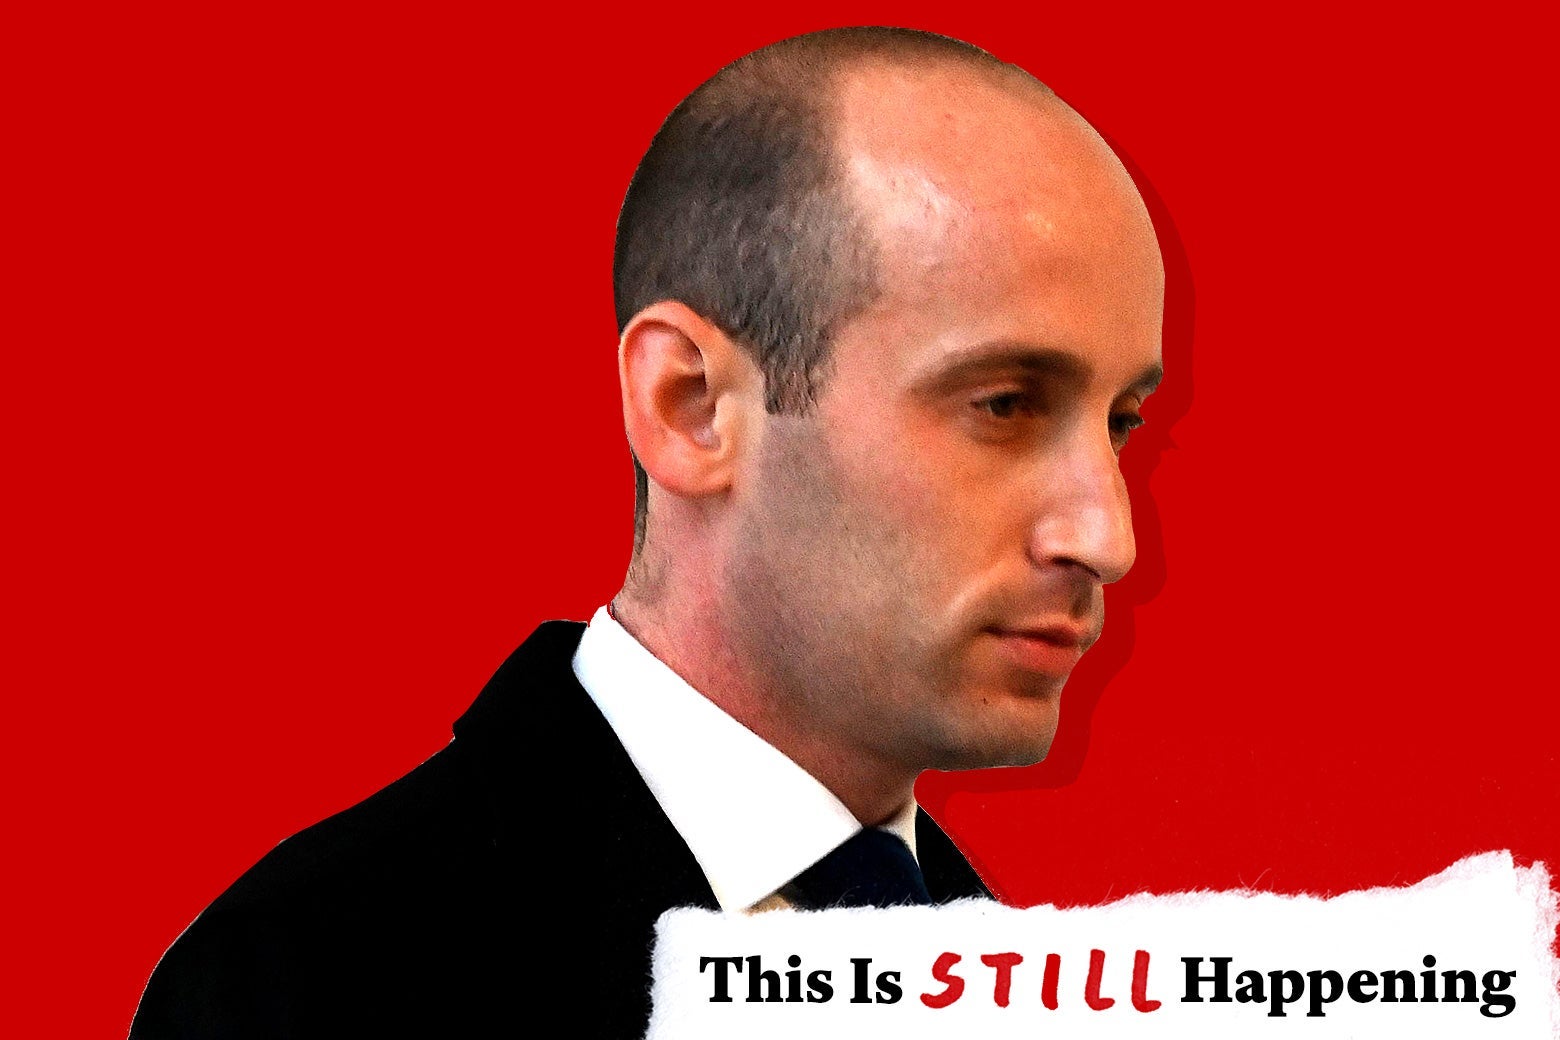 Stephen Miller with text in the corner that says, "This Is Still Happening."